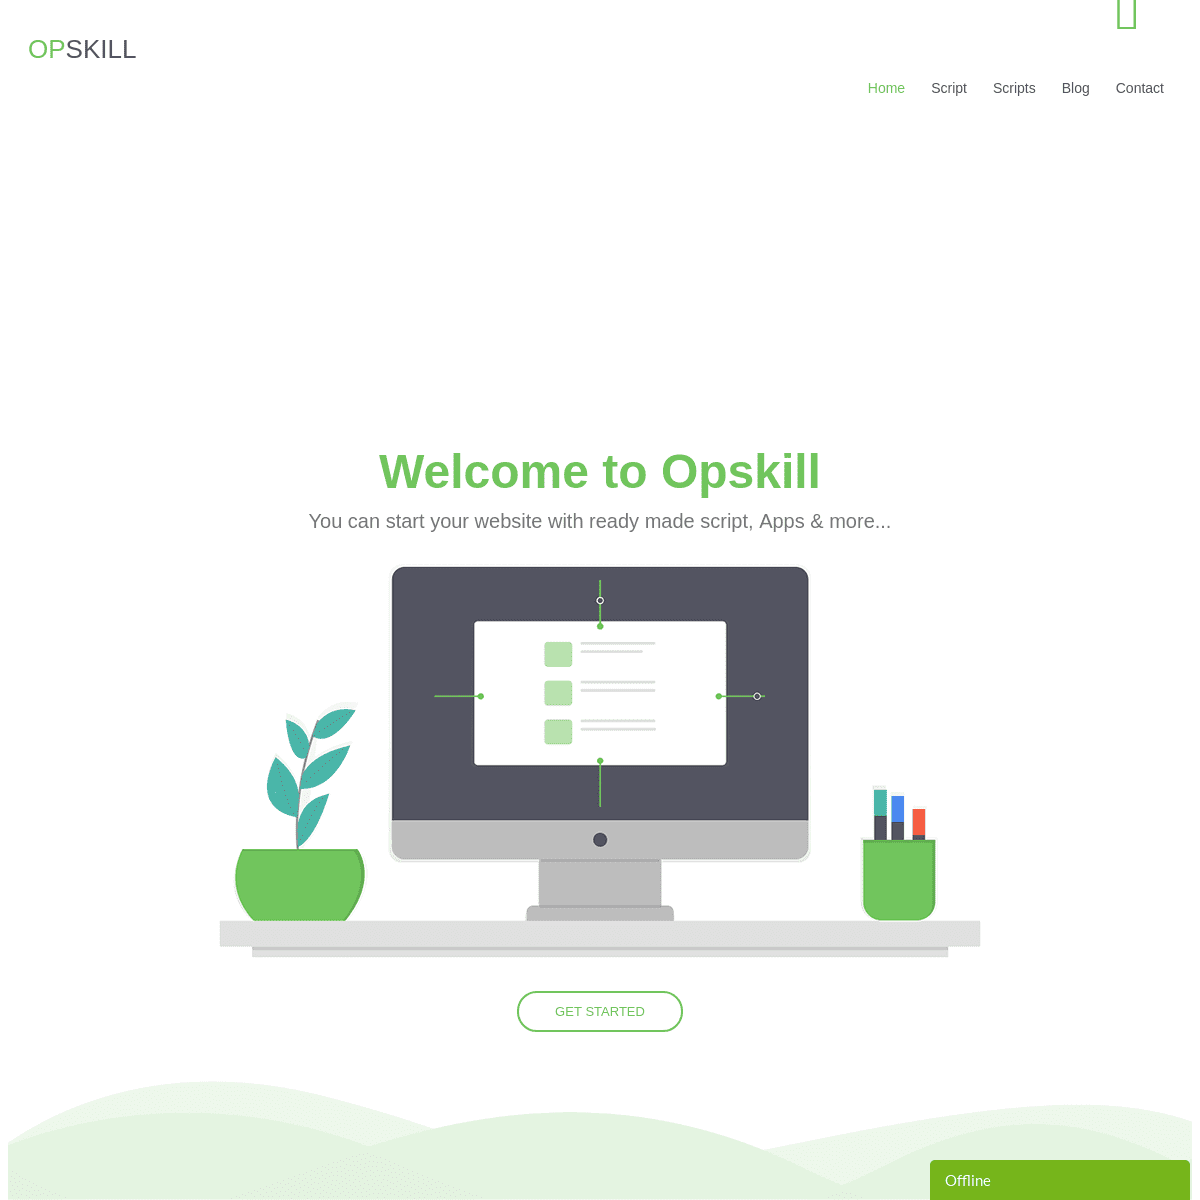 A complete backup of opskill.com